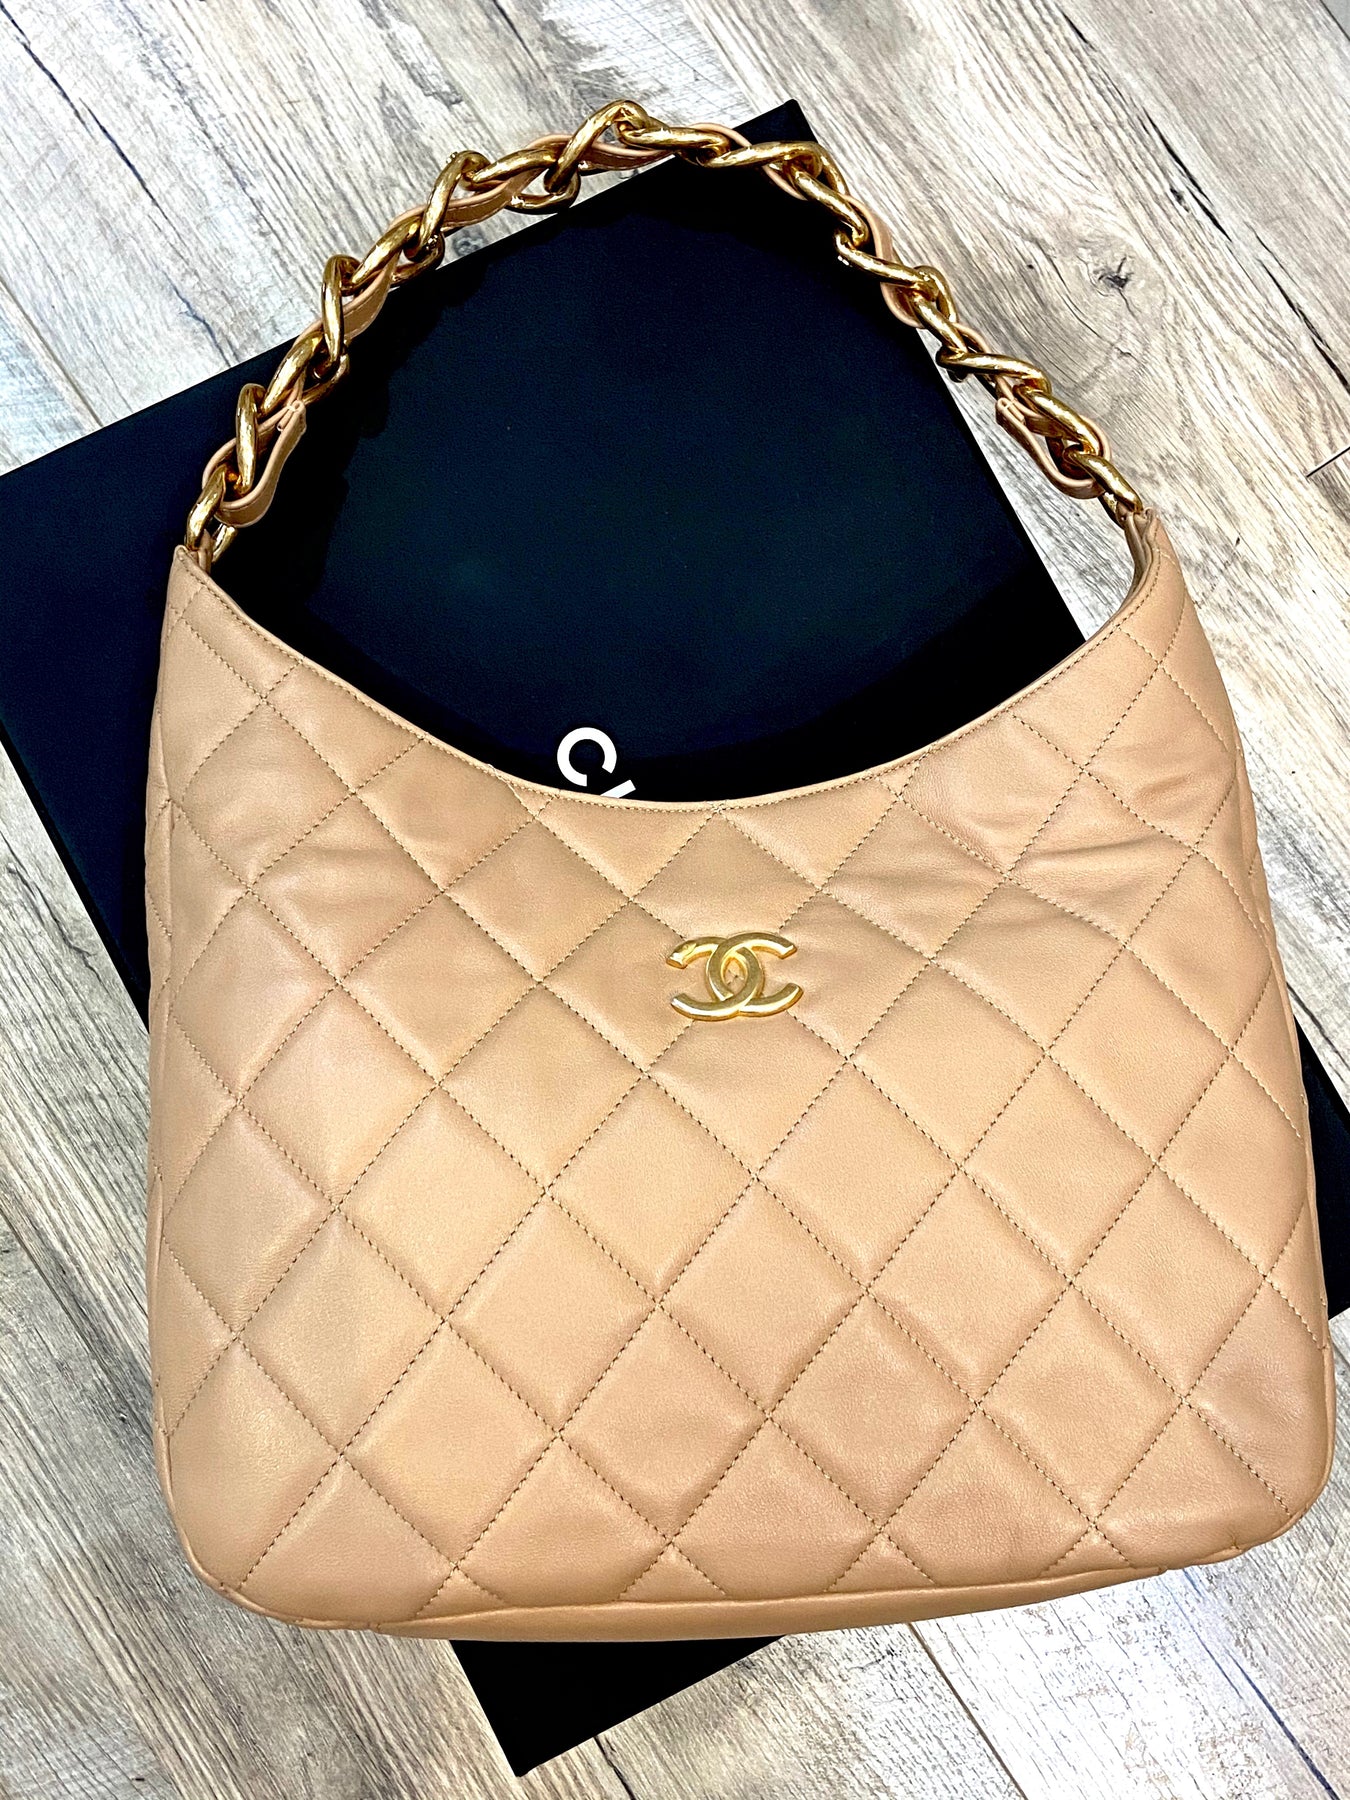 CHANEL CC QUILTED LAMBSKIN HOBO BAG